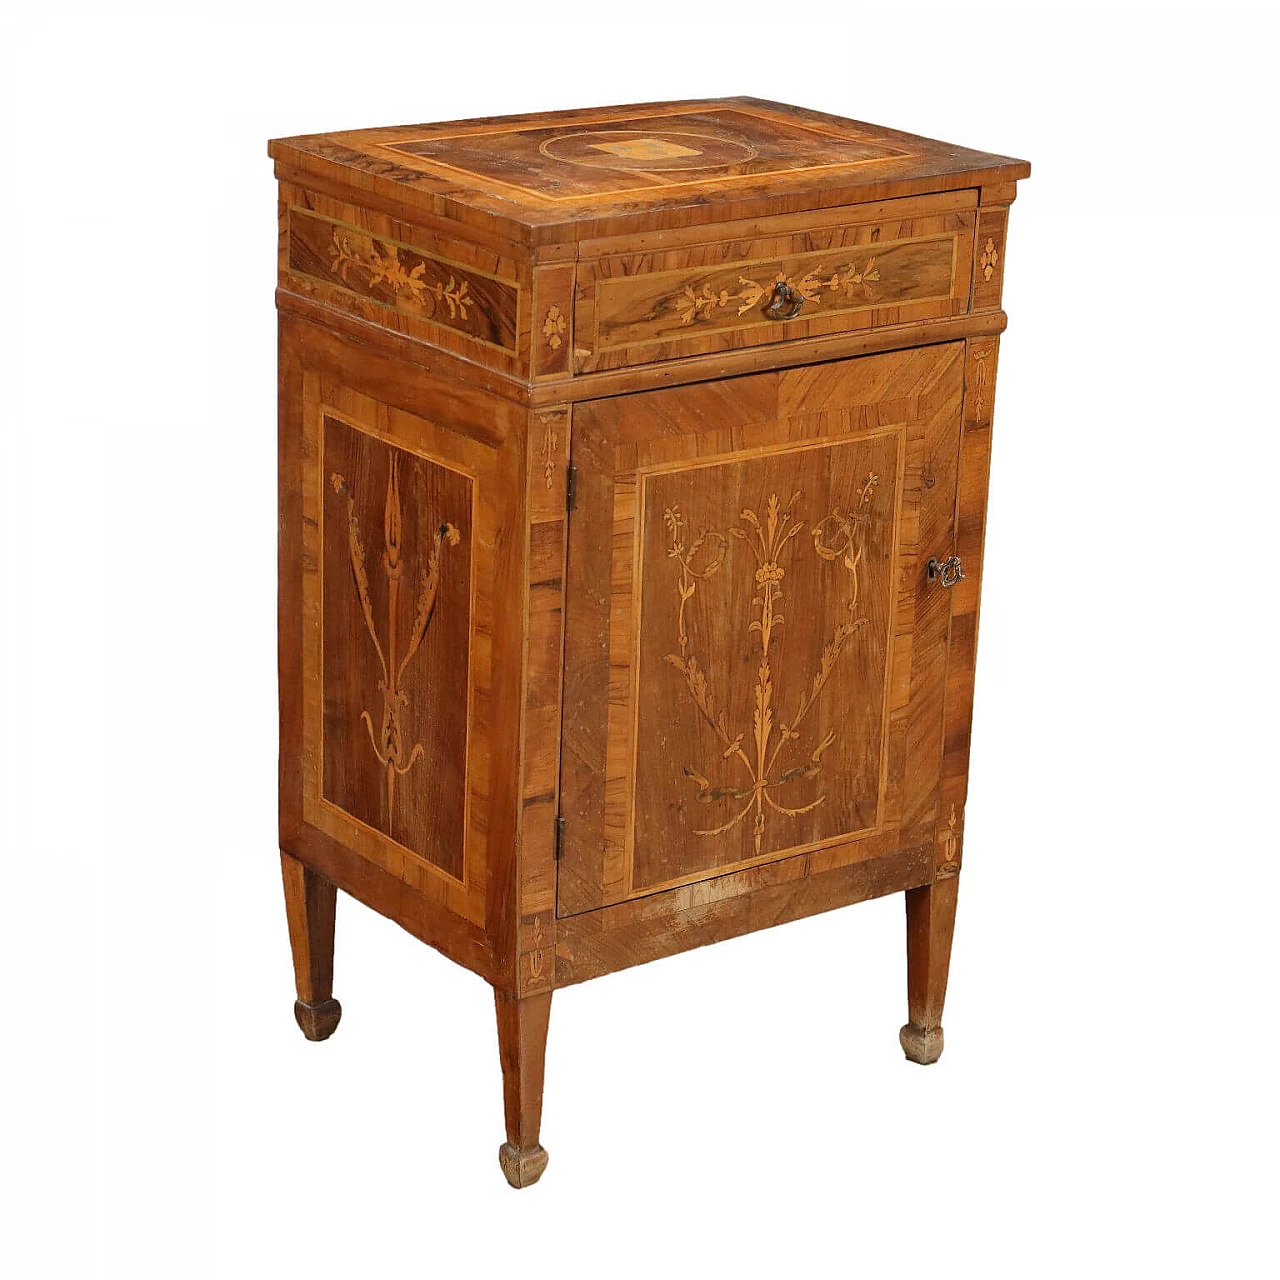 Neoclassical inlaid wood bedside table, late 18th century 1